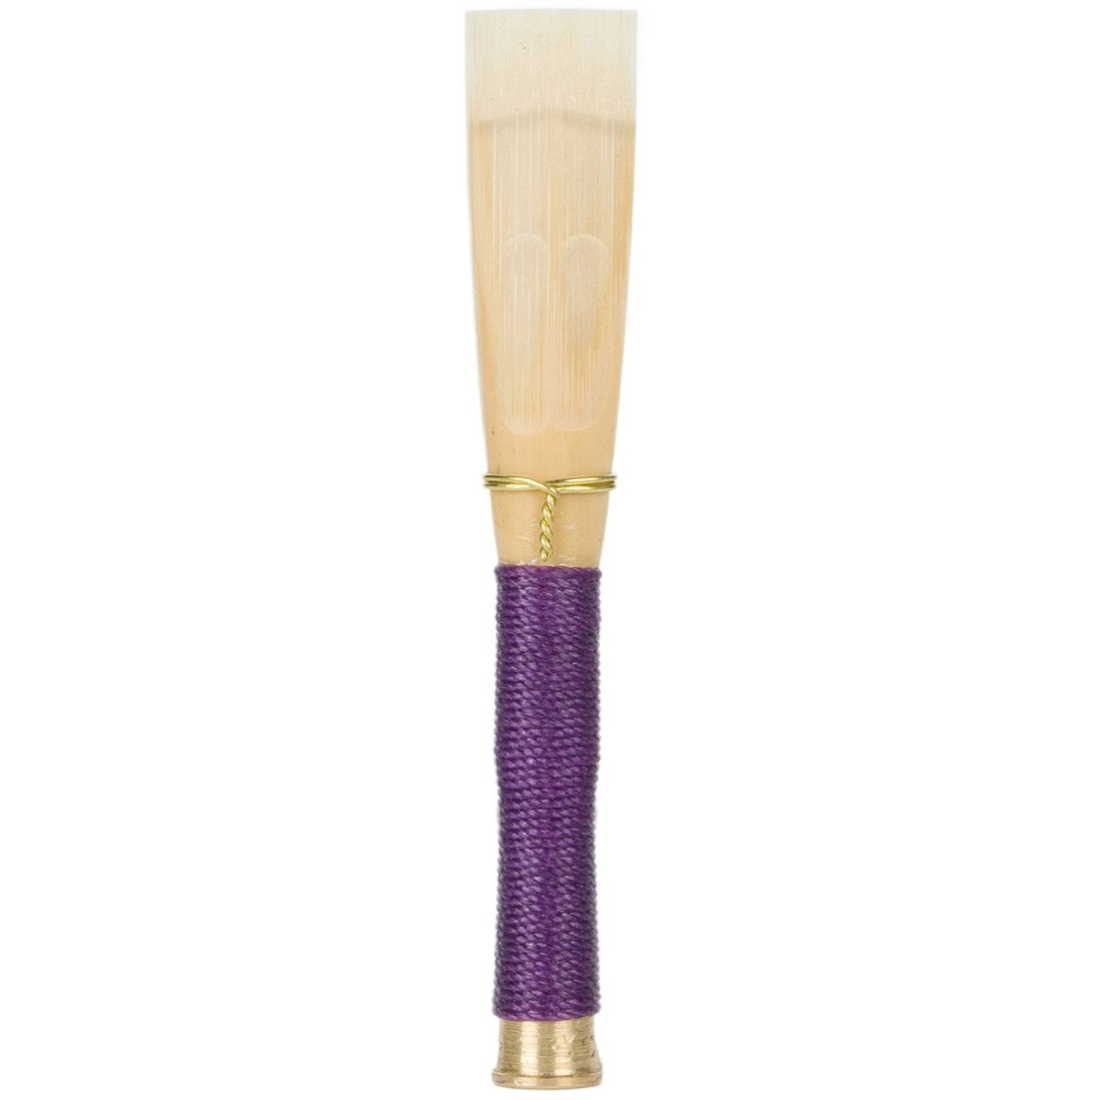 Jones Artist series English Horn Reed cane wound with purple string - strength of Medium Soft